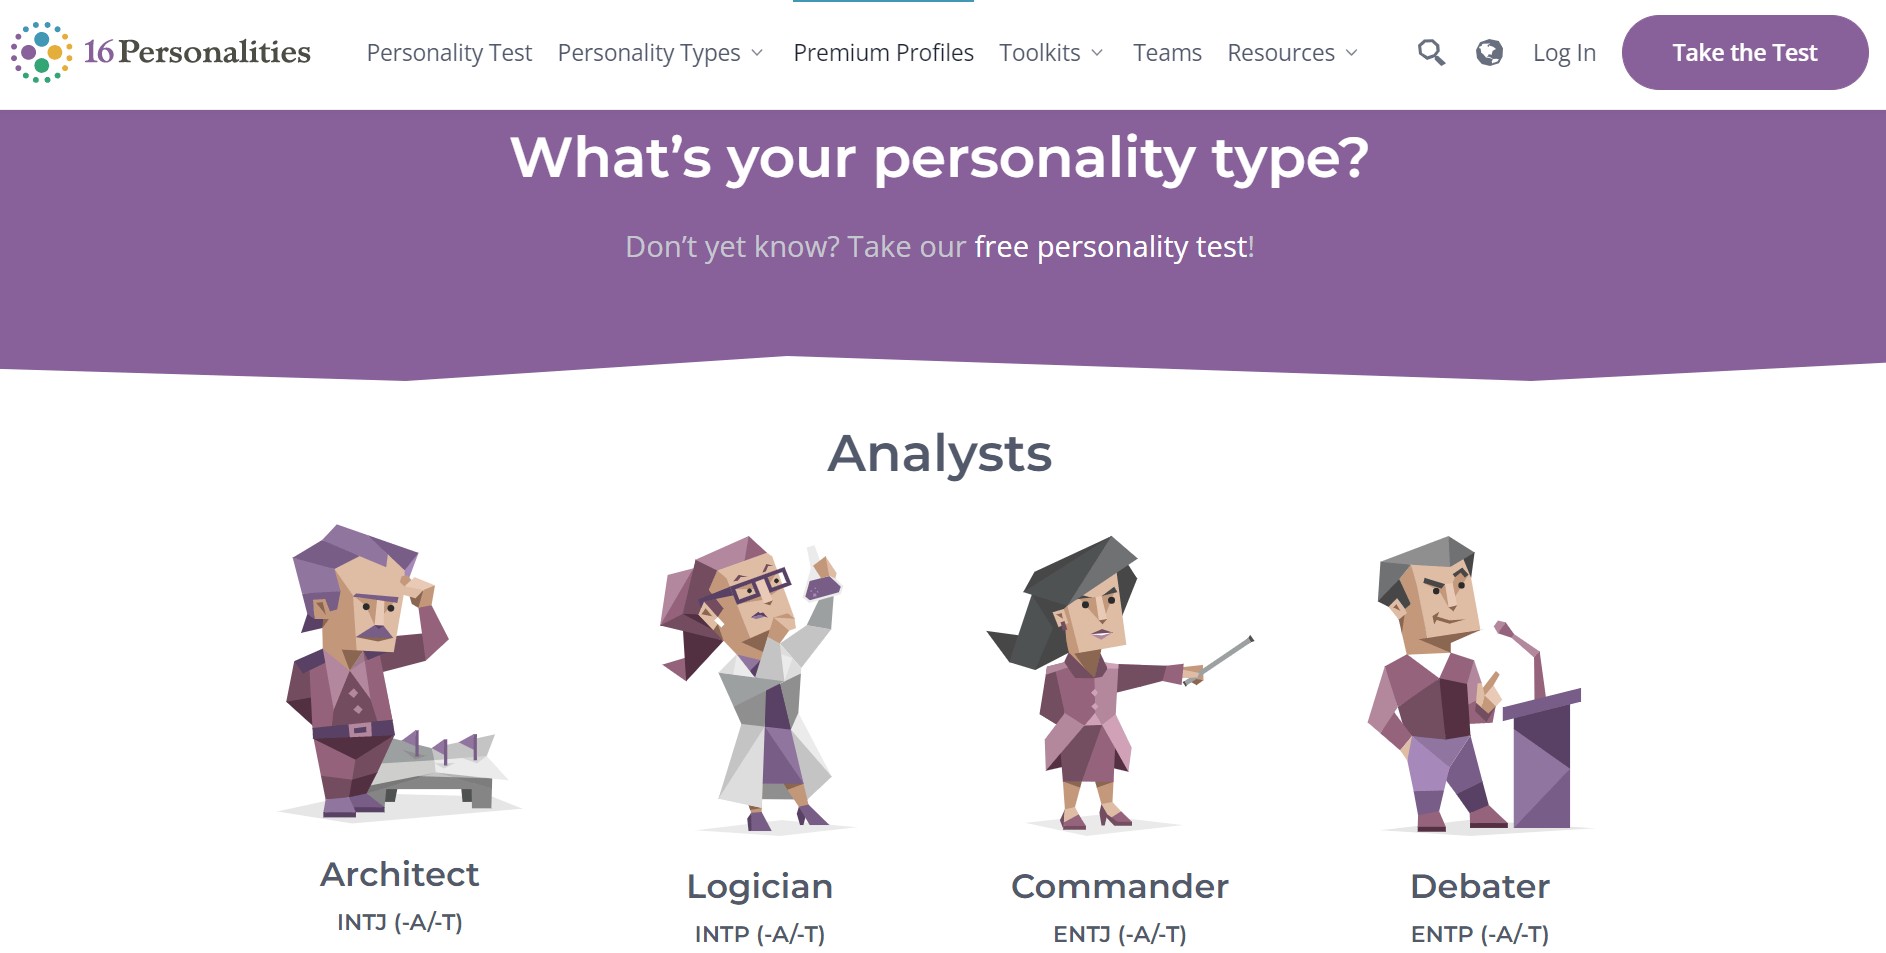 Job search process steps: learn your personality type